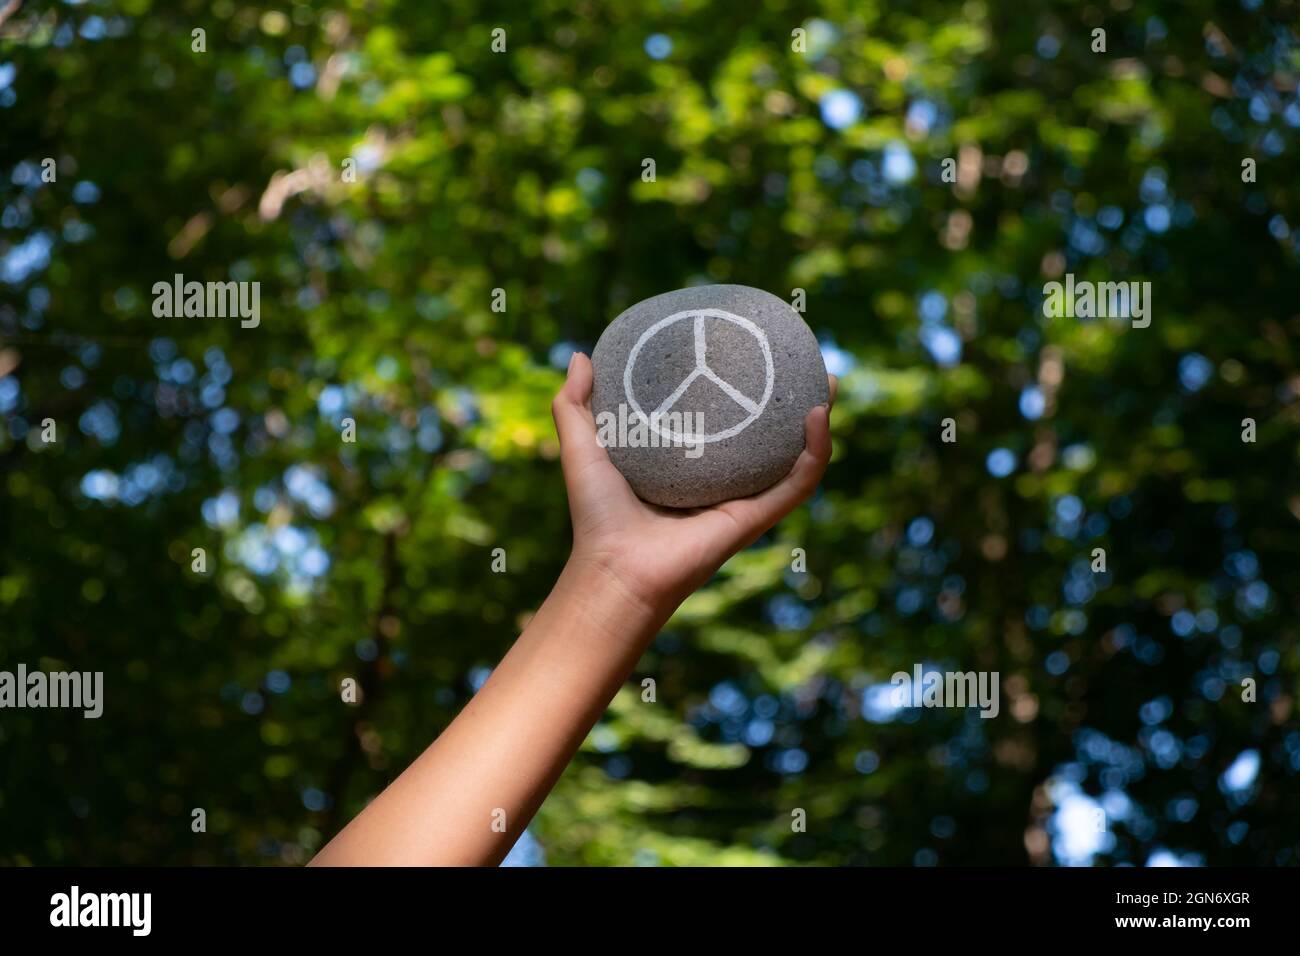 Peace symbol in hands of a child surronded by nature Stock Photo